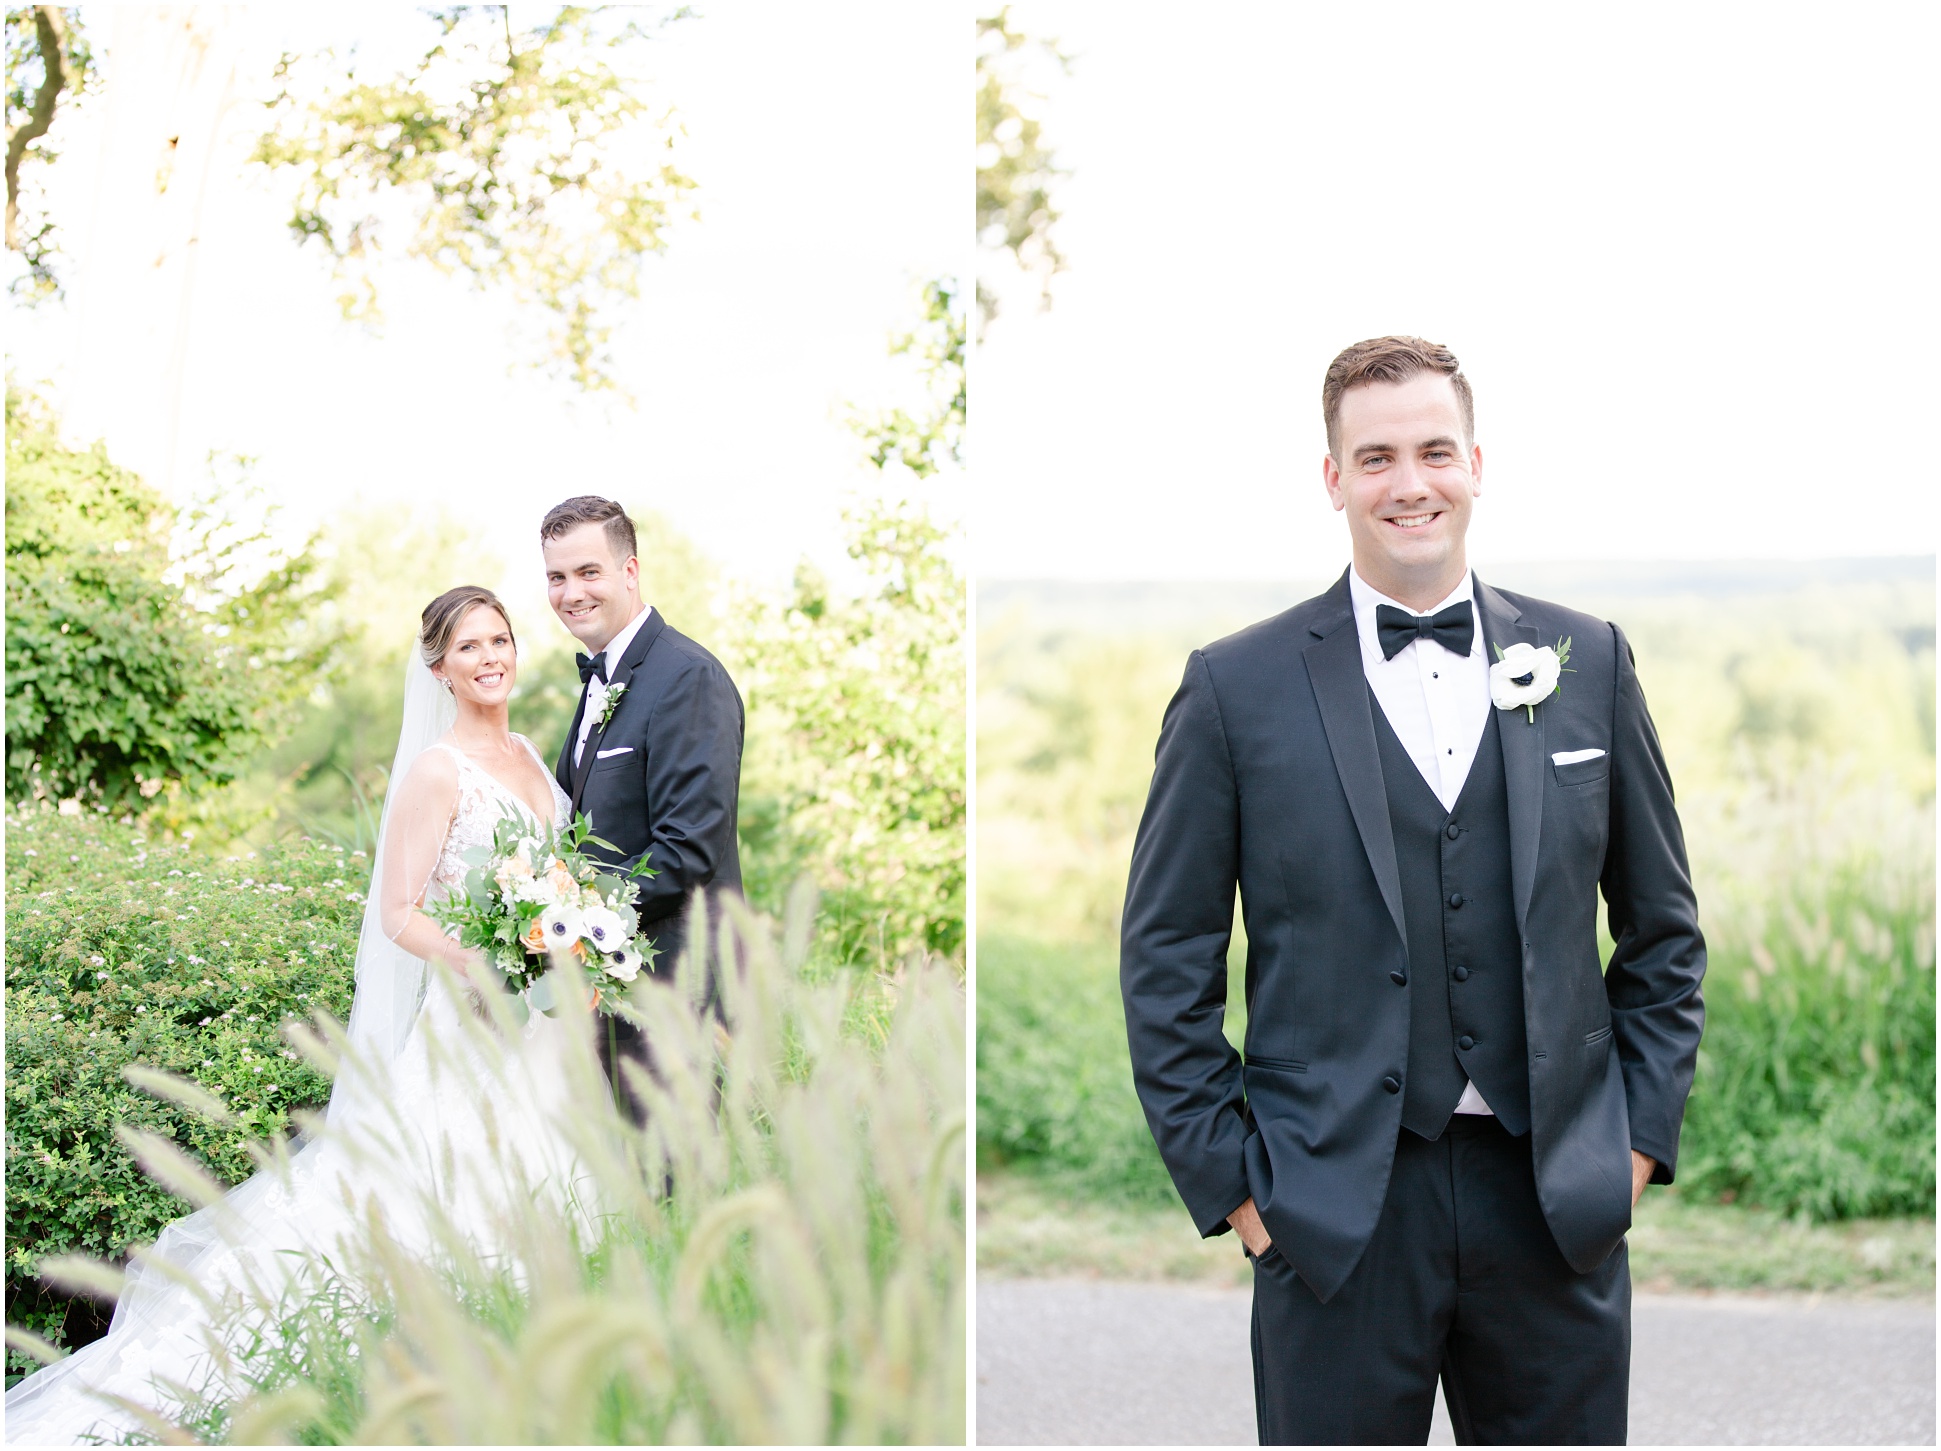 Left: Husband and wife portrait, right image: the groom! 